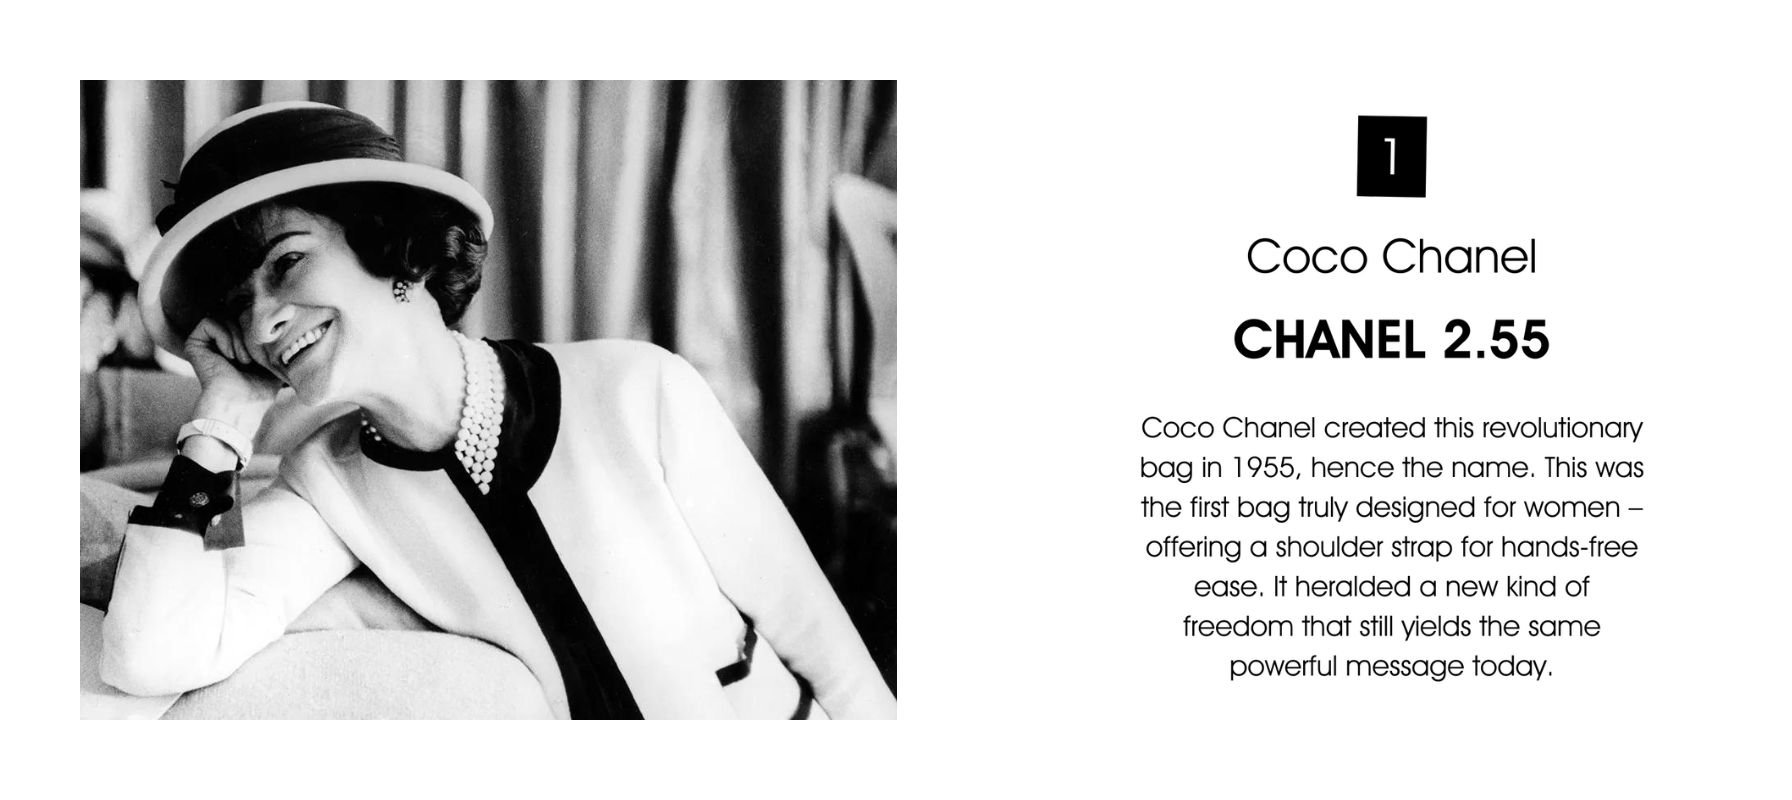 Coco Chanel designed the 2.55 in 1955 and was the first bag truly created with women in mind, by offering a practical shoulder strap. Shop at The handbag Clinic today